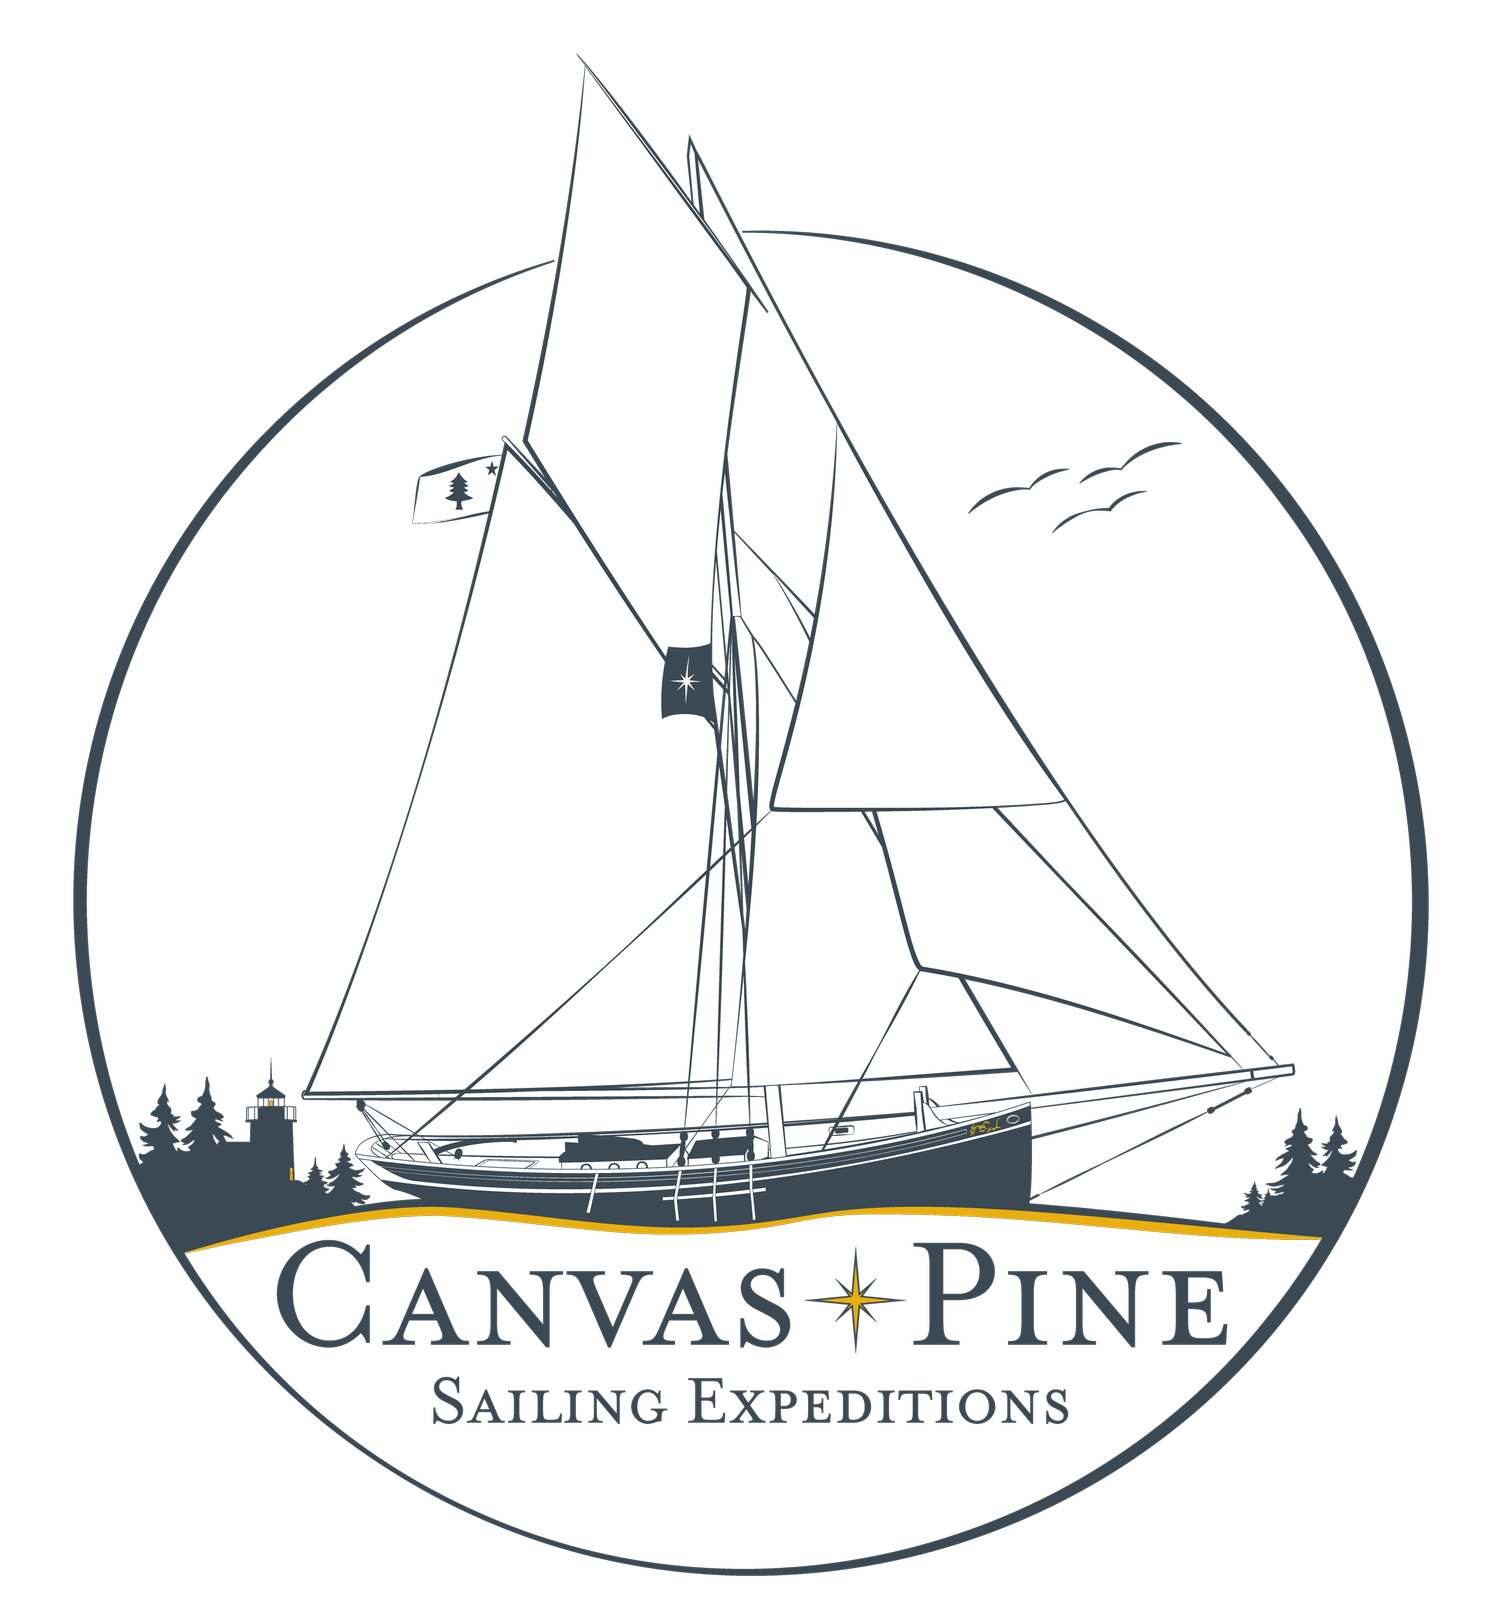 Canvas + Pine Sailing Expeditions